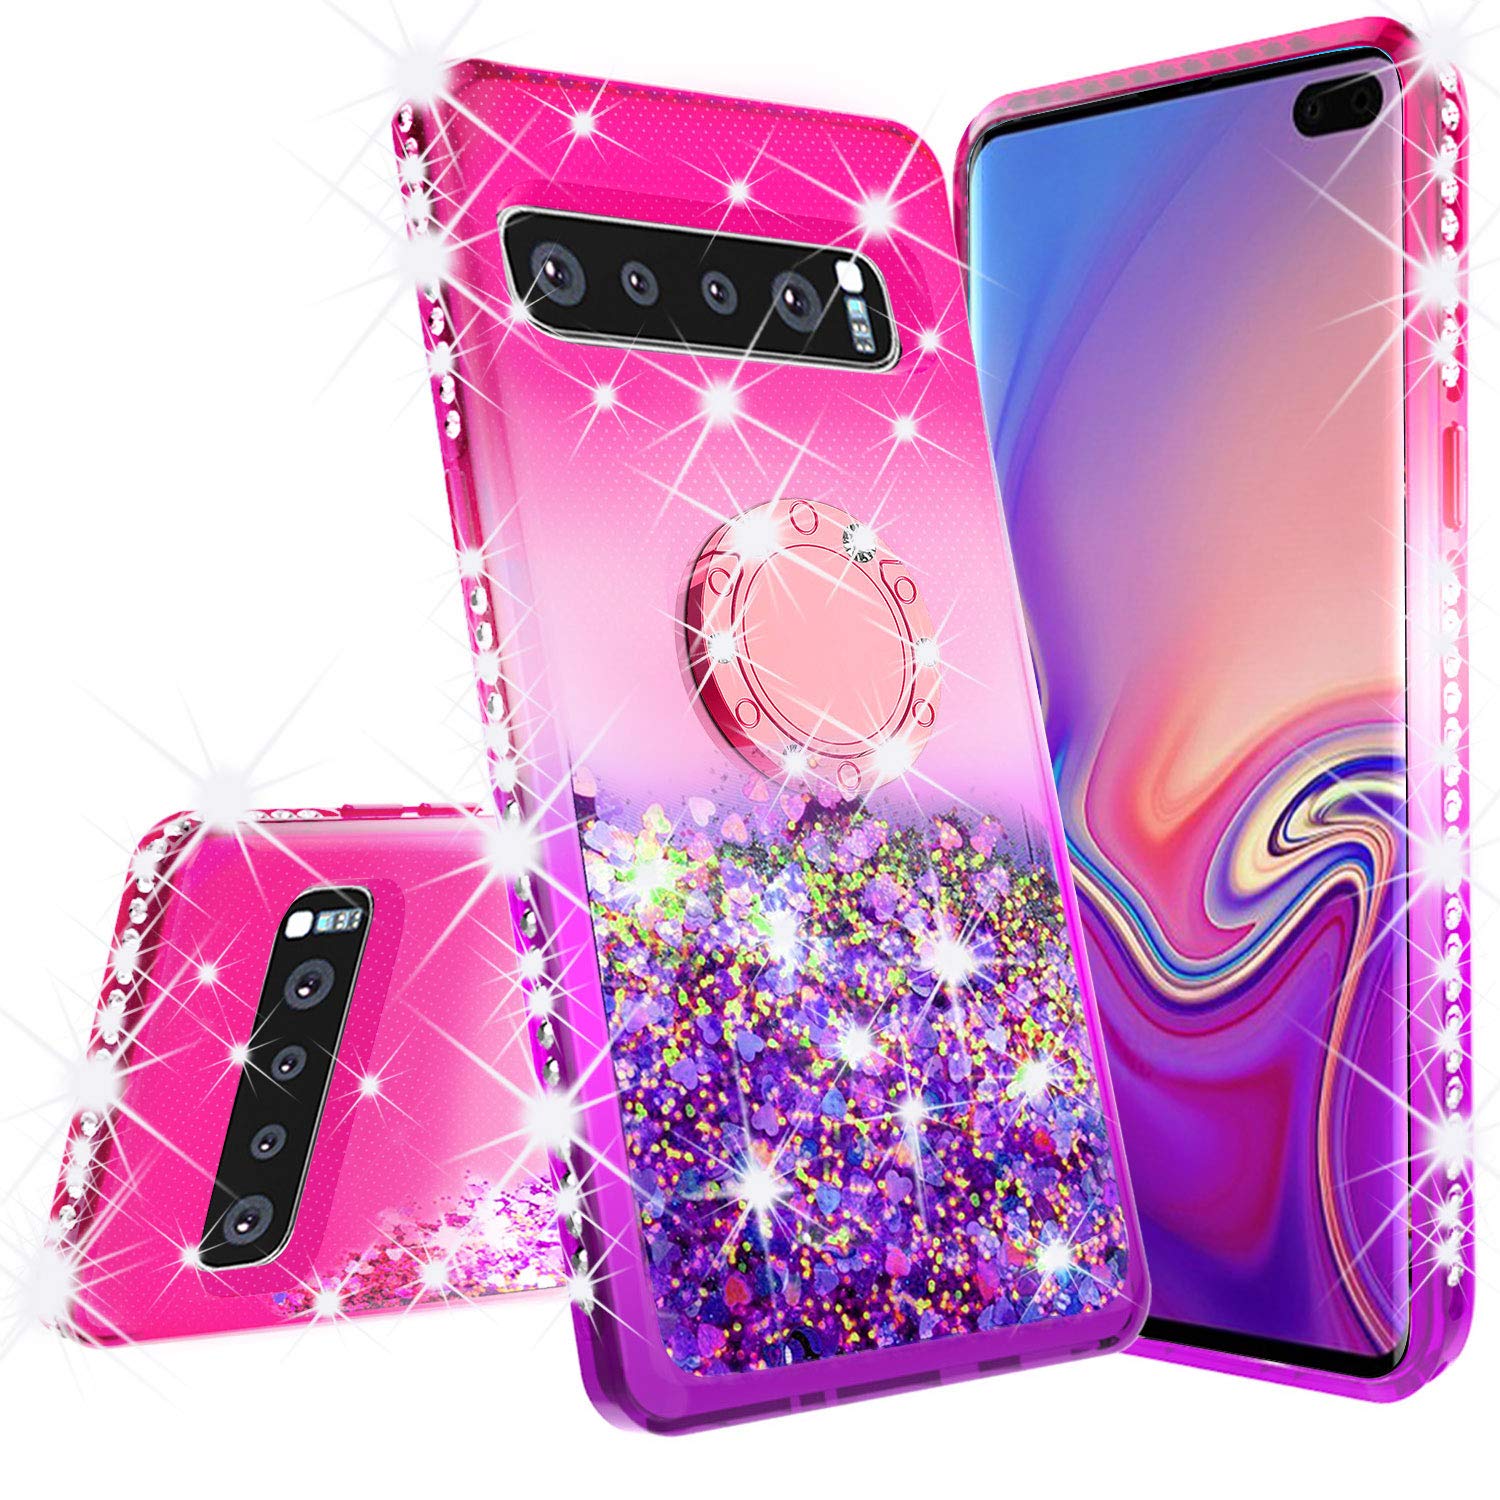 For Samsung Galaxy S10 Case,Ring Stand Glitter Liquid Quicksand Waterfall Floating Sparkle Shiny Bling Diamond Girls Cute Shock Proof Phone Case Cover for Galaxy S10 - Hot Pink/Blue - image 2 of 5